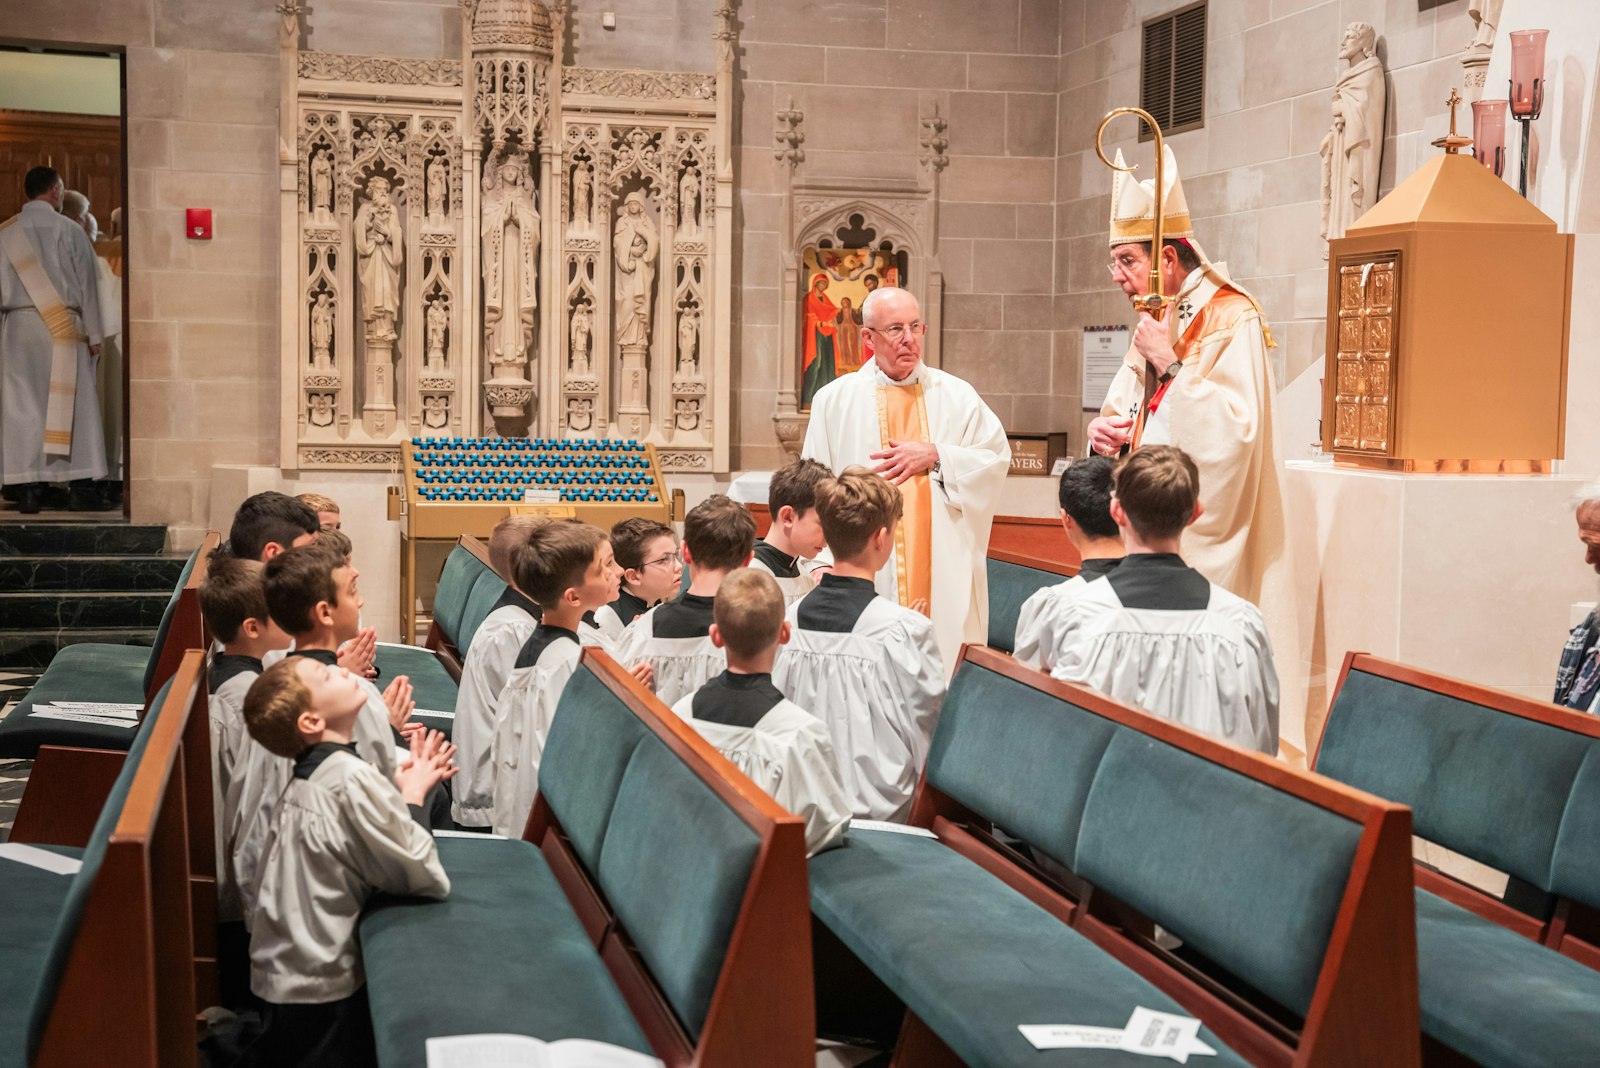 Archbishop Vigneron talks with altar servers in the Eucharistic chapel of the Cathedral of the Most Blessed Sacrament in Detroit during the Chrism Mass.